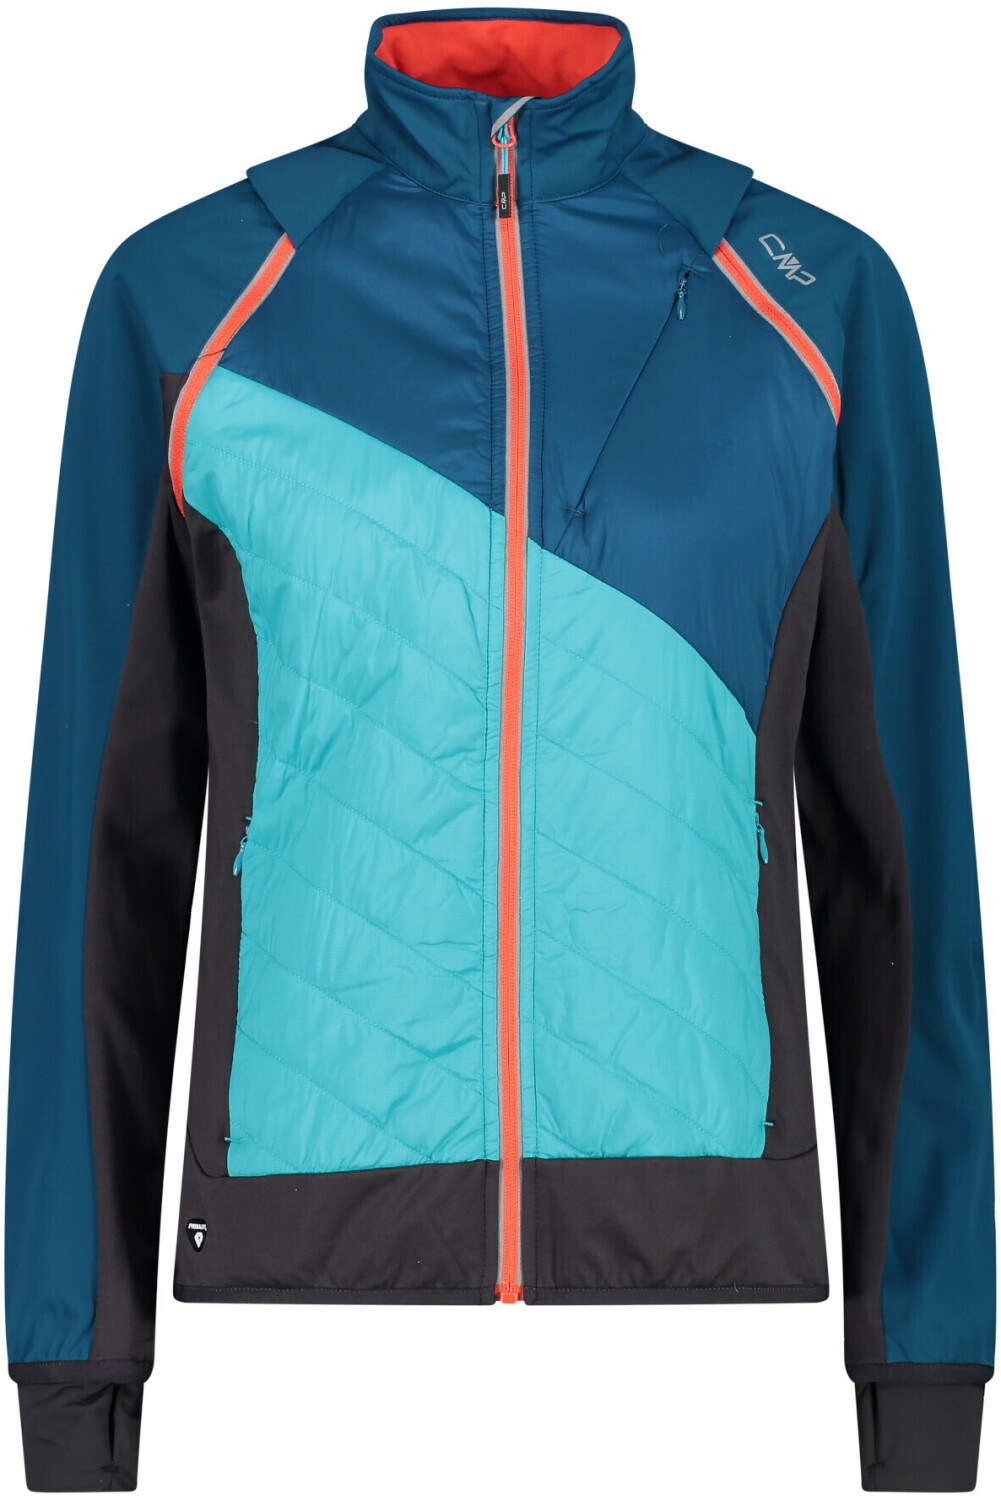 (Today) with lake Deals Jacket deep Buy Best £60.49 Removable (30A2276) CMP – on Women\'s Sleeves from Hybrid